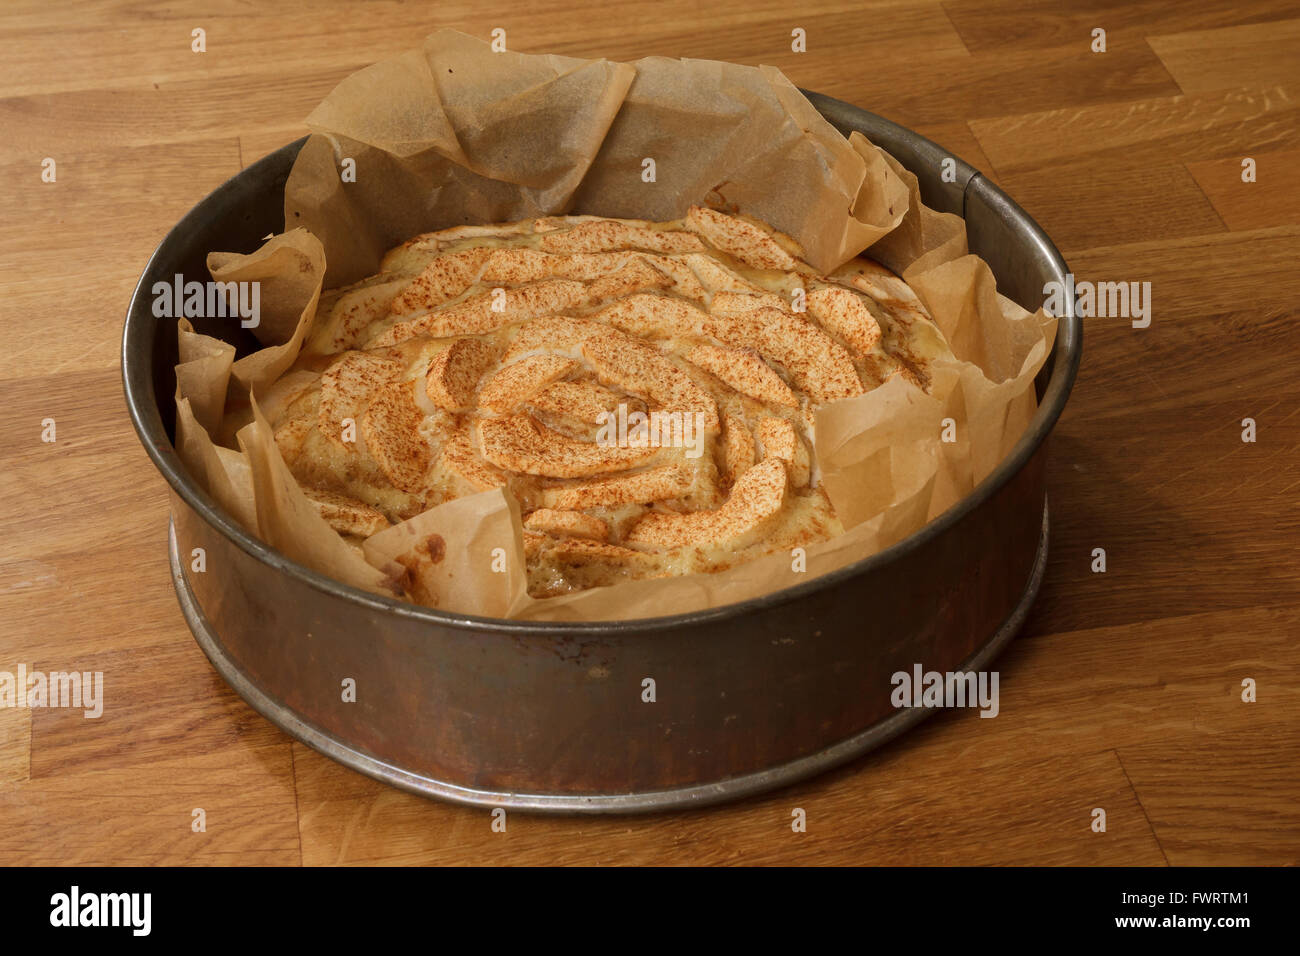 Baked apple pie in a metal springform standing on a wooden table Stock Photo